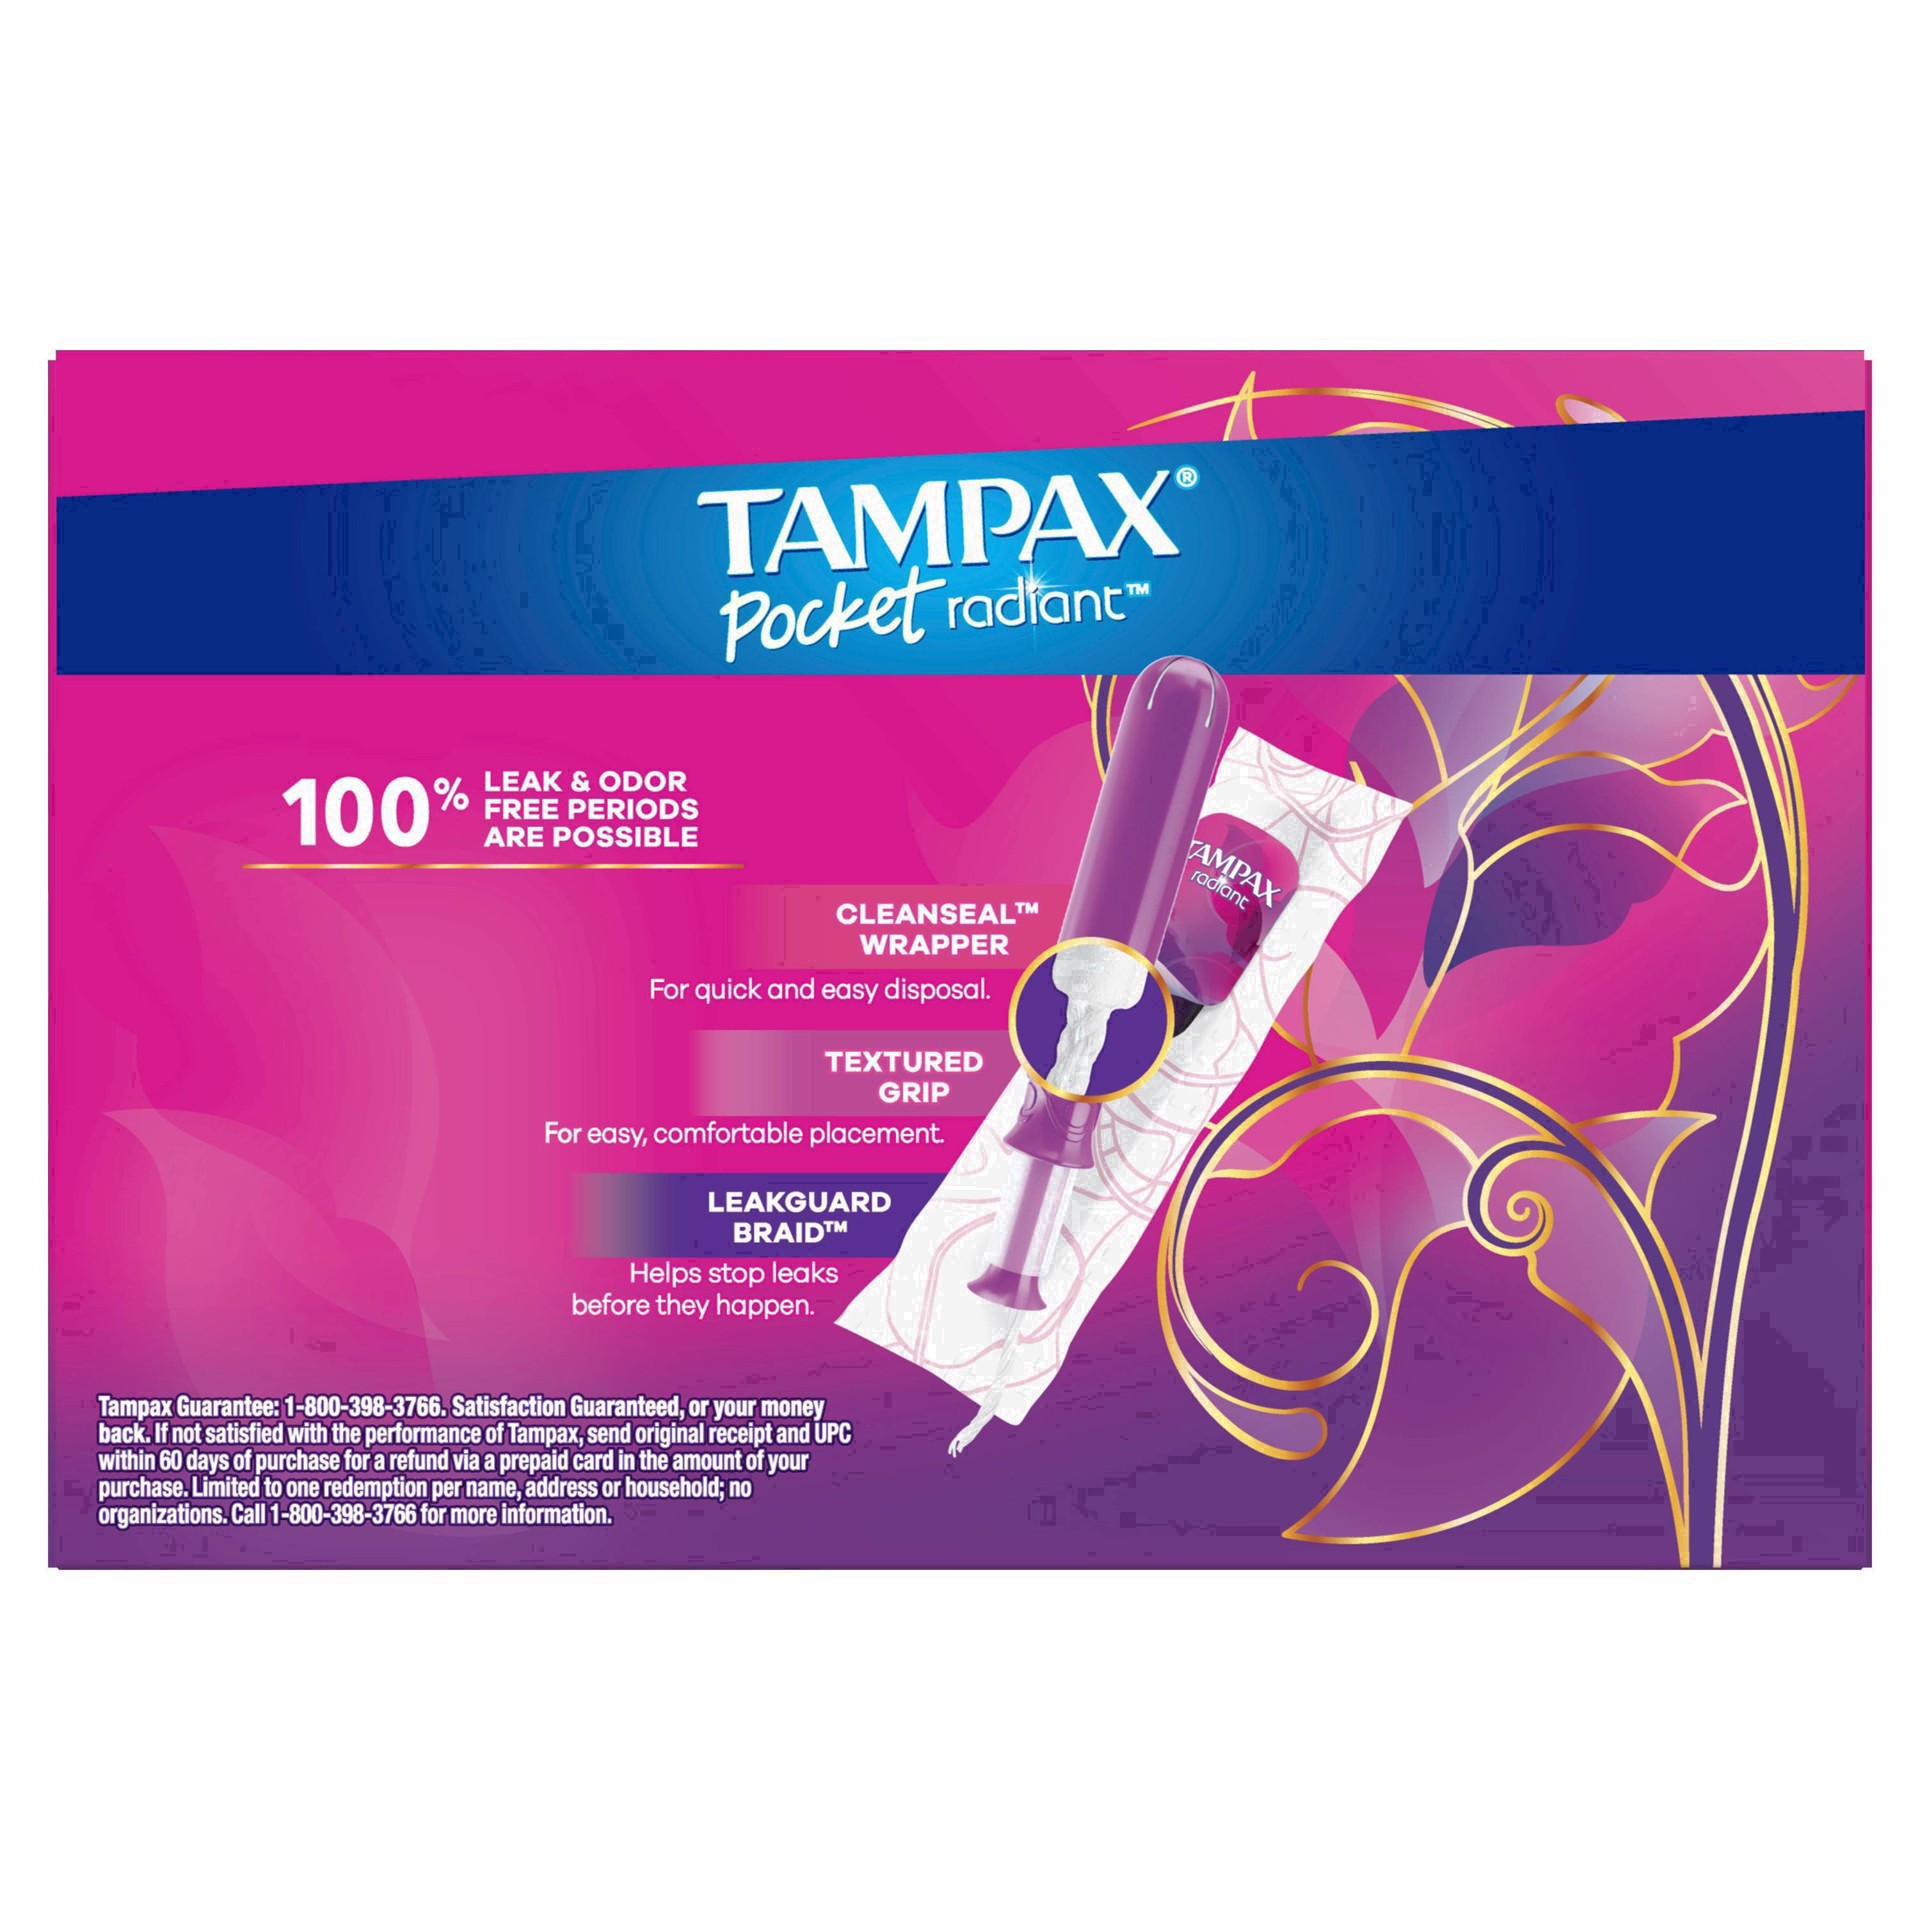 slide 14 of 94, Tampax Pocket Radiant Compact Plastic Tampons, With LeakGuard Braid, Super Absorbency, Unscented, 28 Count, 28 ct